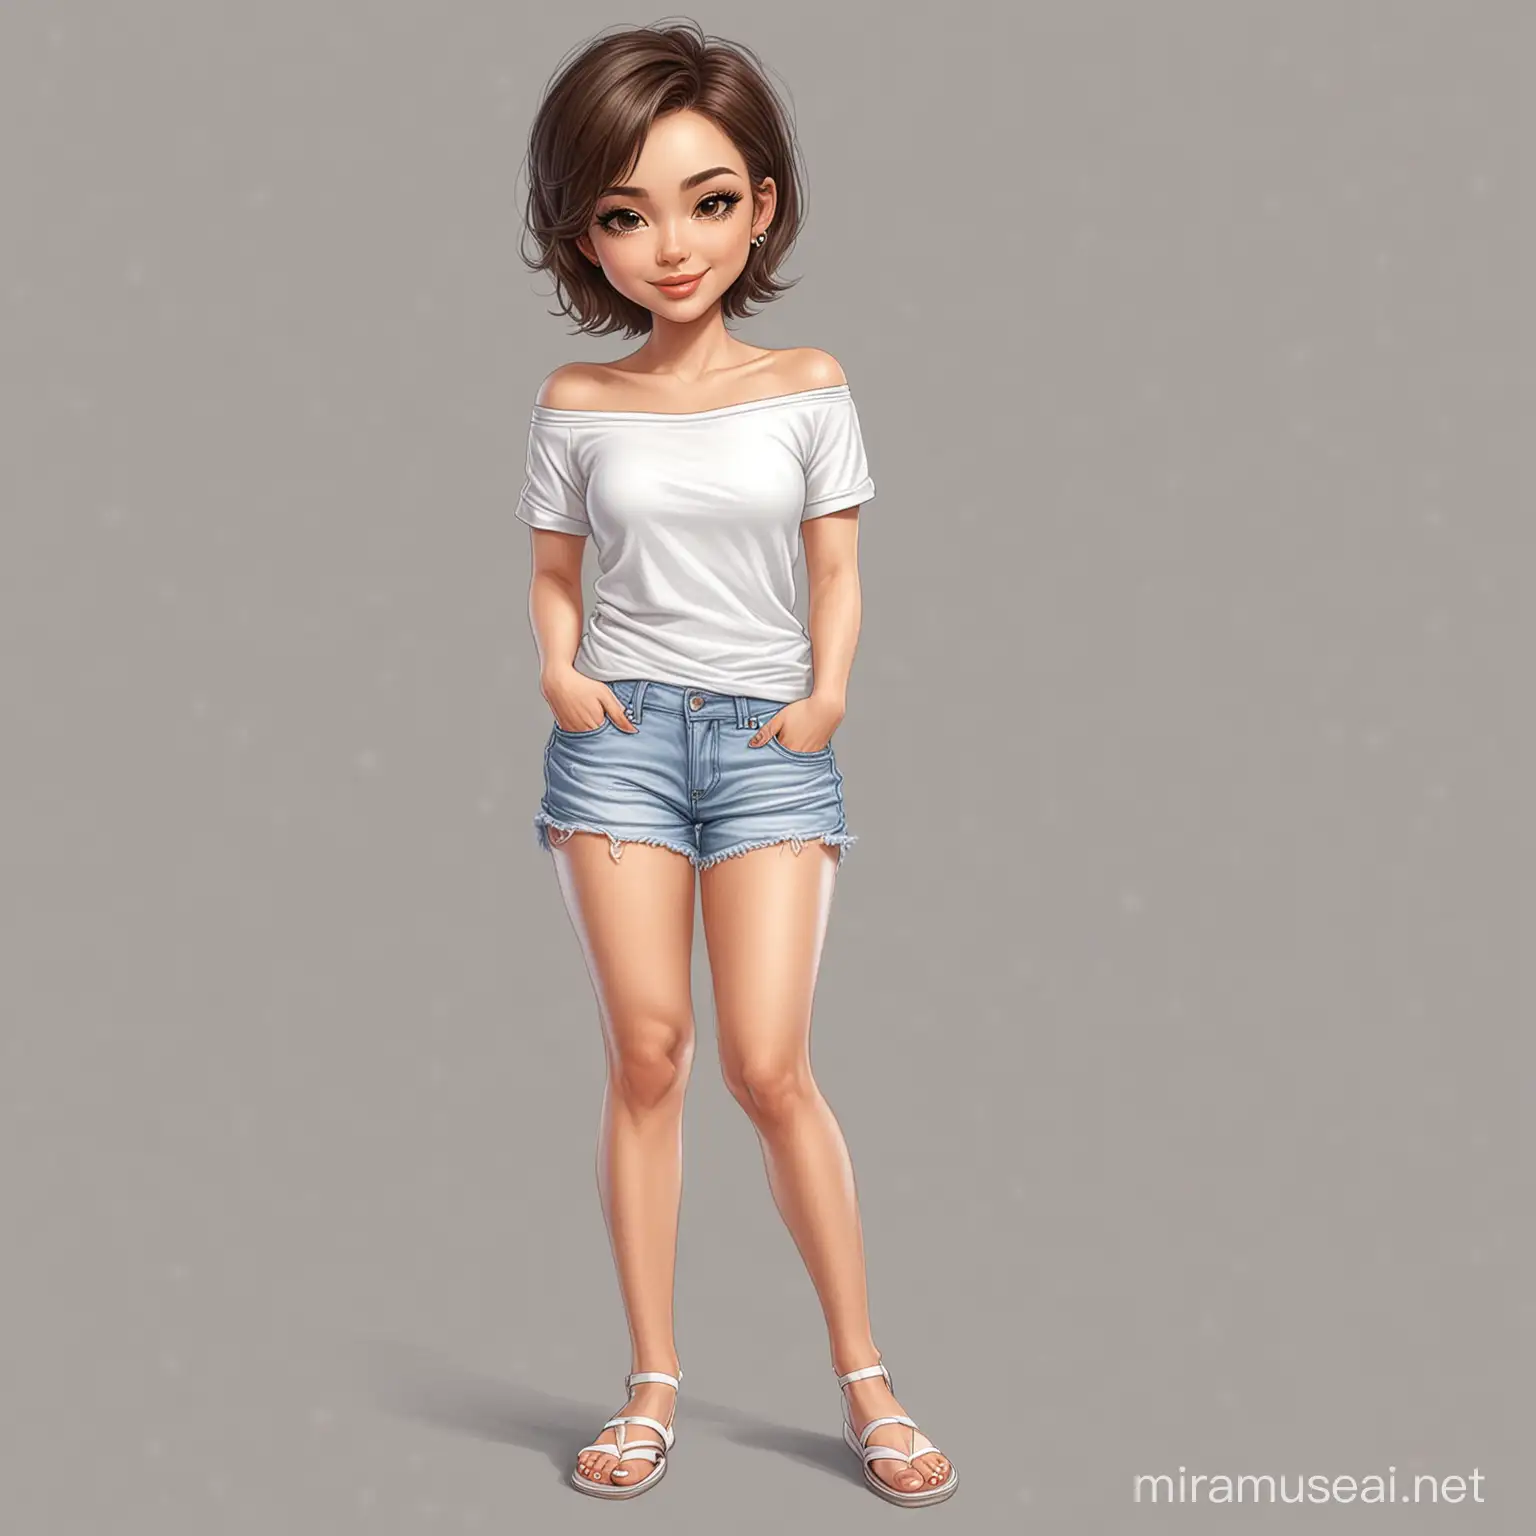  AI Art Image Prompt Quick pencil drawn caricature of a beautiful sexy woman, chibi style, with short hair, almond eyes, pointed chin, she is wearing a white, tight t-shirt, casual mini skirt pants, off-the-shoulder, flip flops, full length, caricature